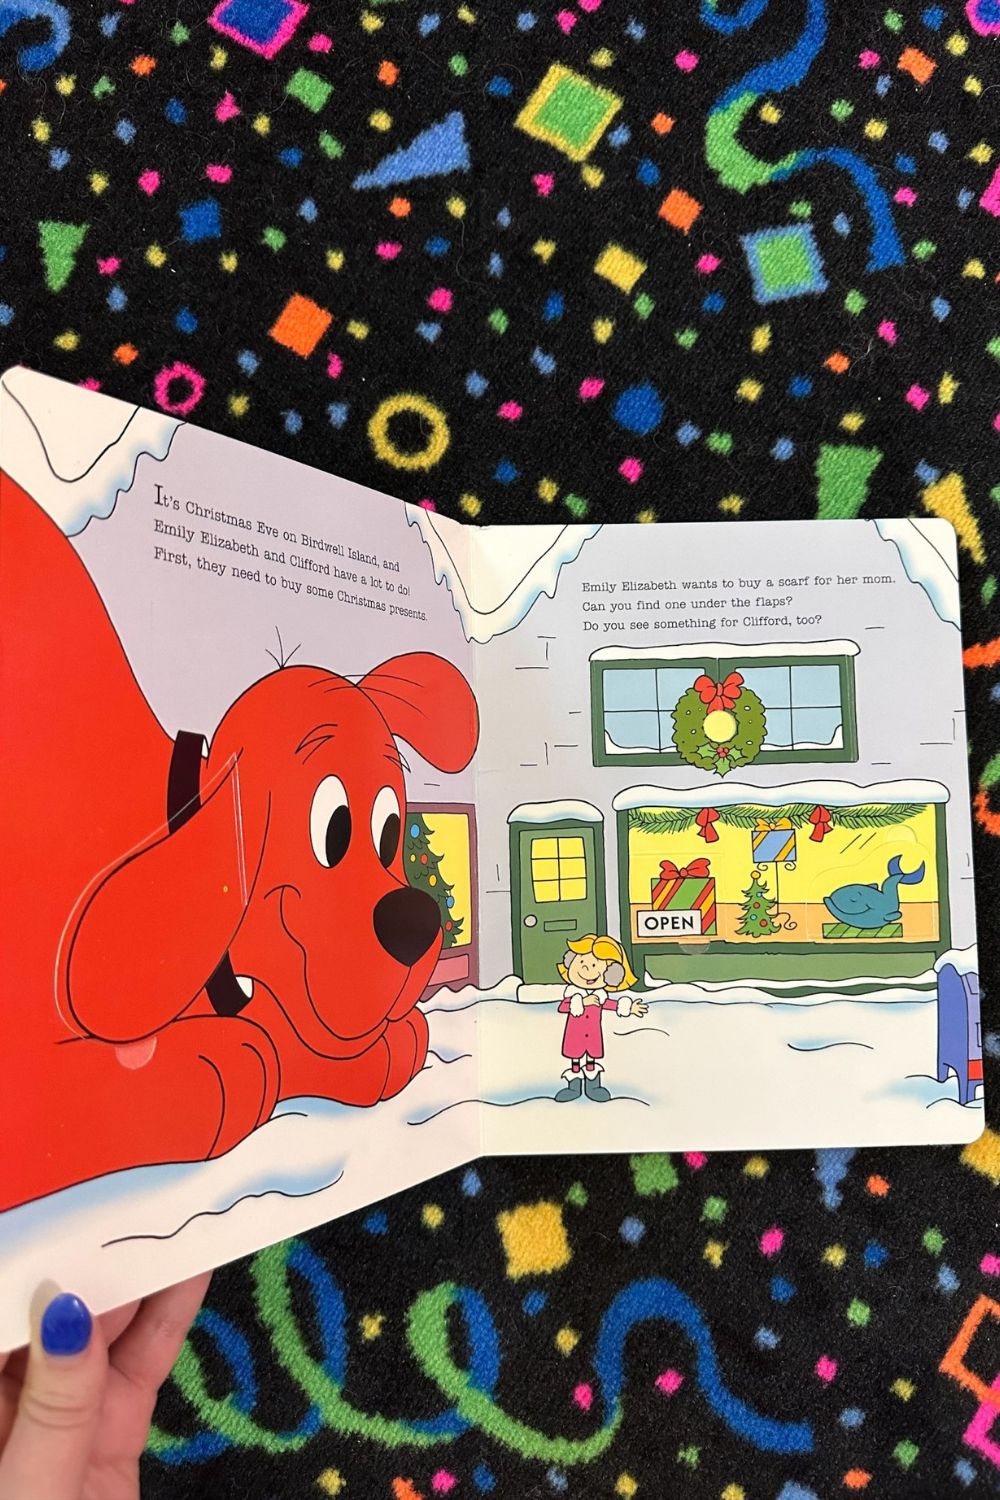 CLIFFORD'S CHRISTMAS PRESENTS BOOK*